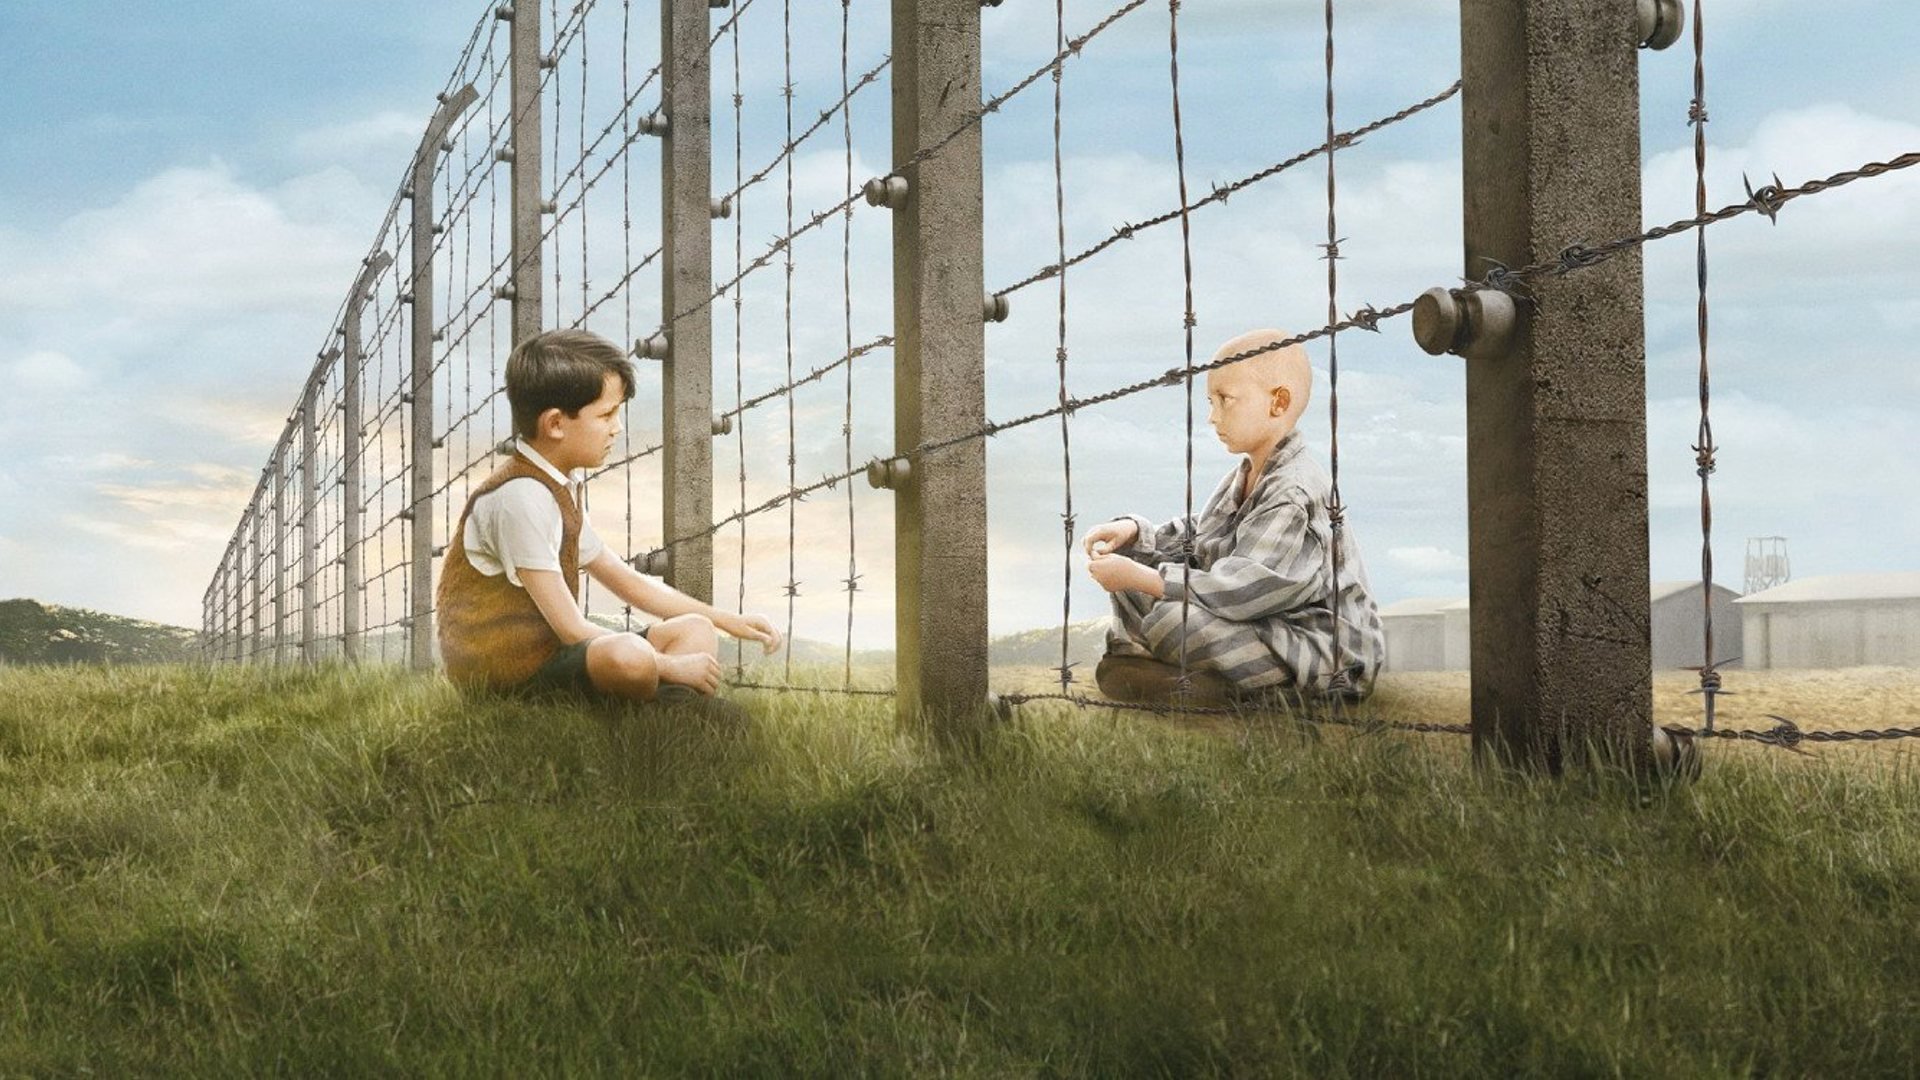 US] The Boy in the Striped Pajamas (2008): When his family moves from  Berlin to Poland, a young boy befriends a boy who lives on the other side  of the fence, unaware